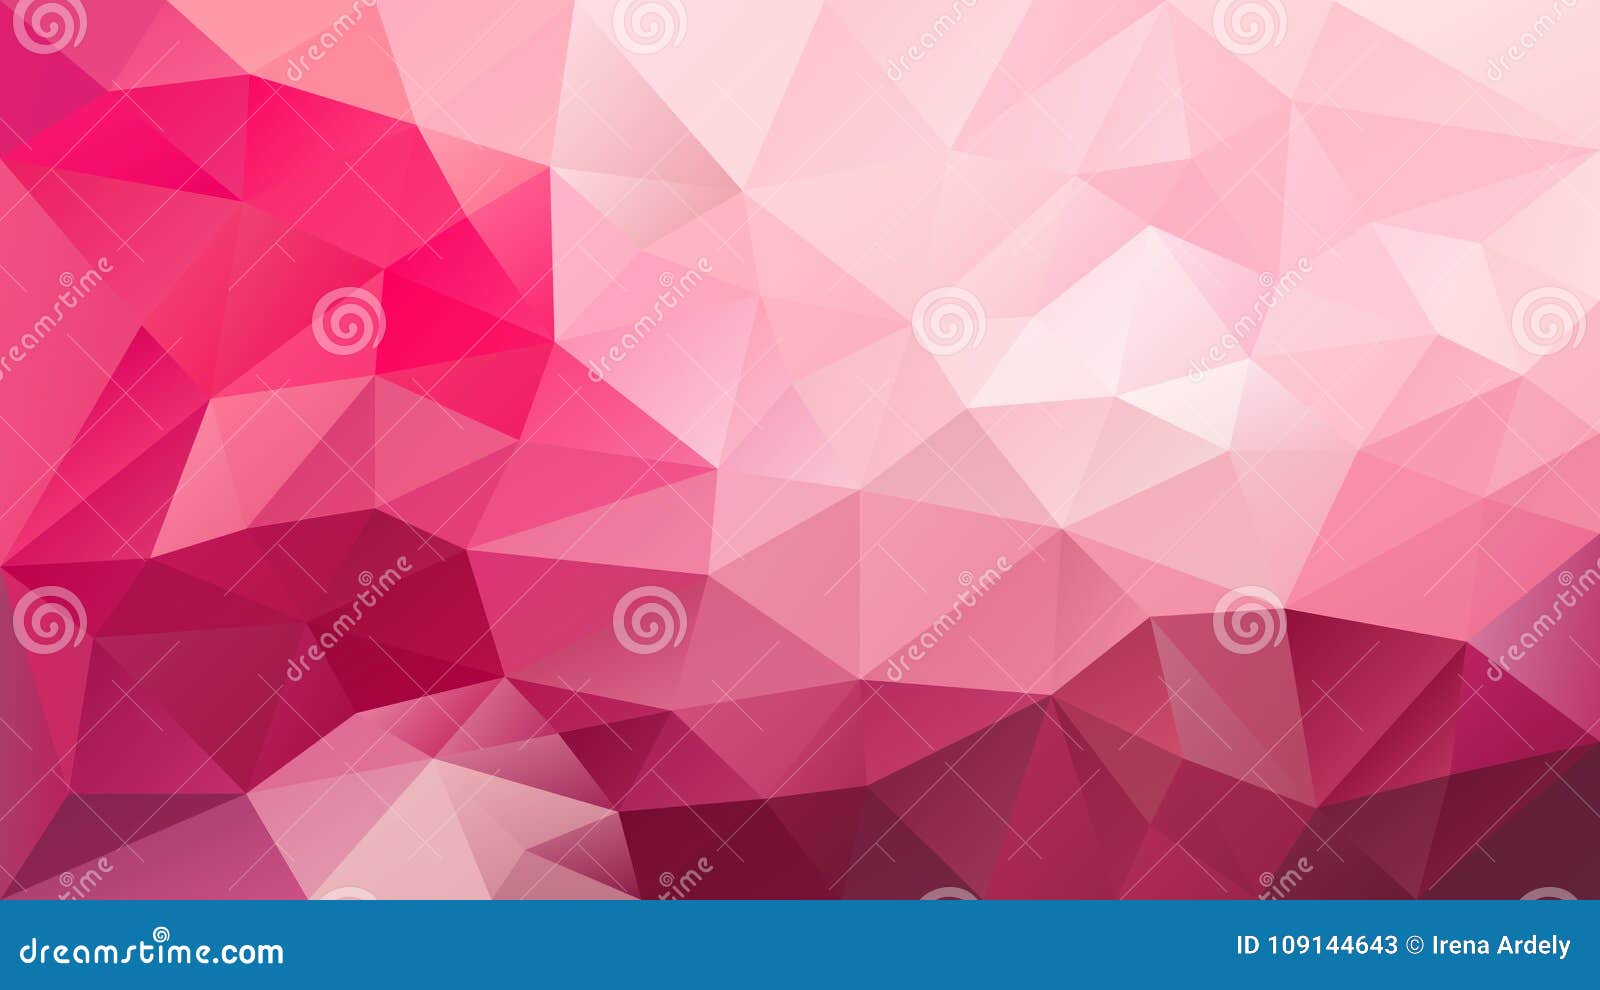  irregular polygonal background - triangle low poly pattern - vibrant hot pink magenta color